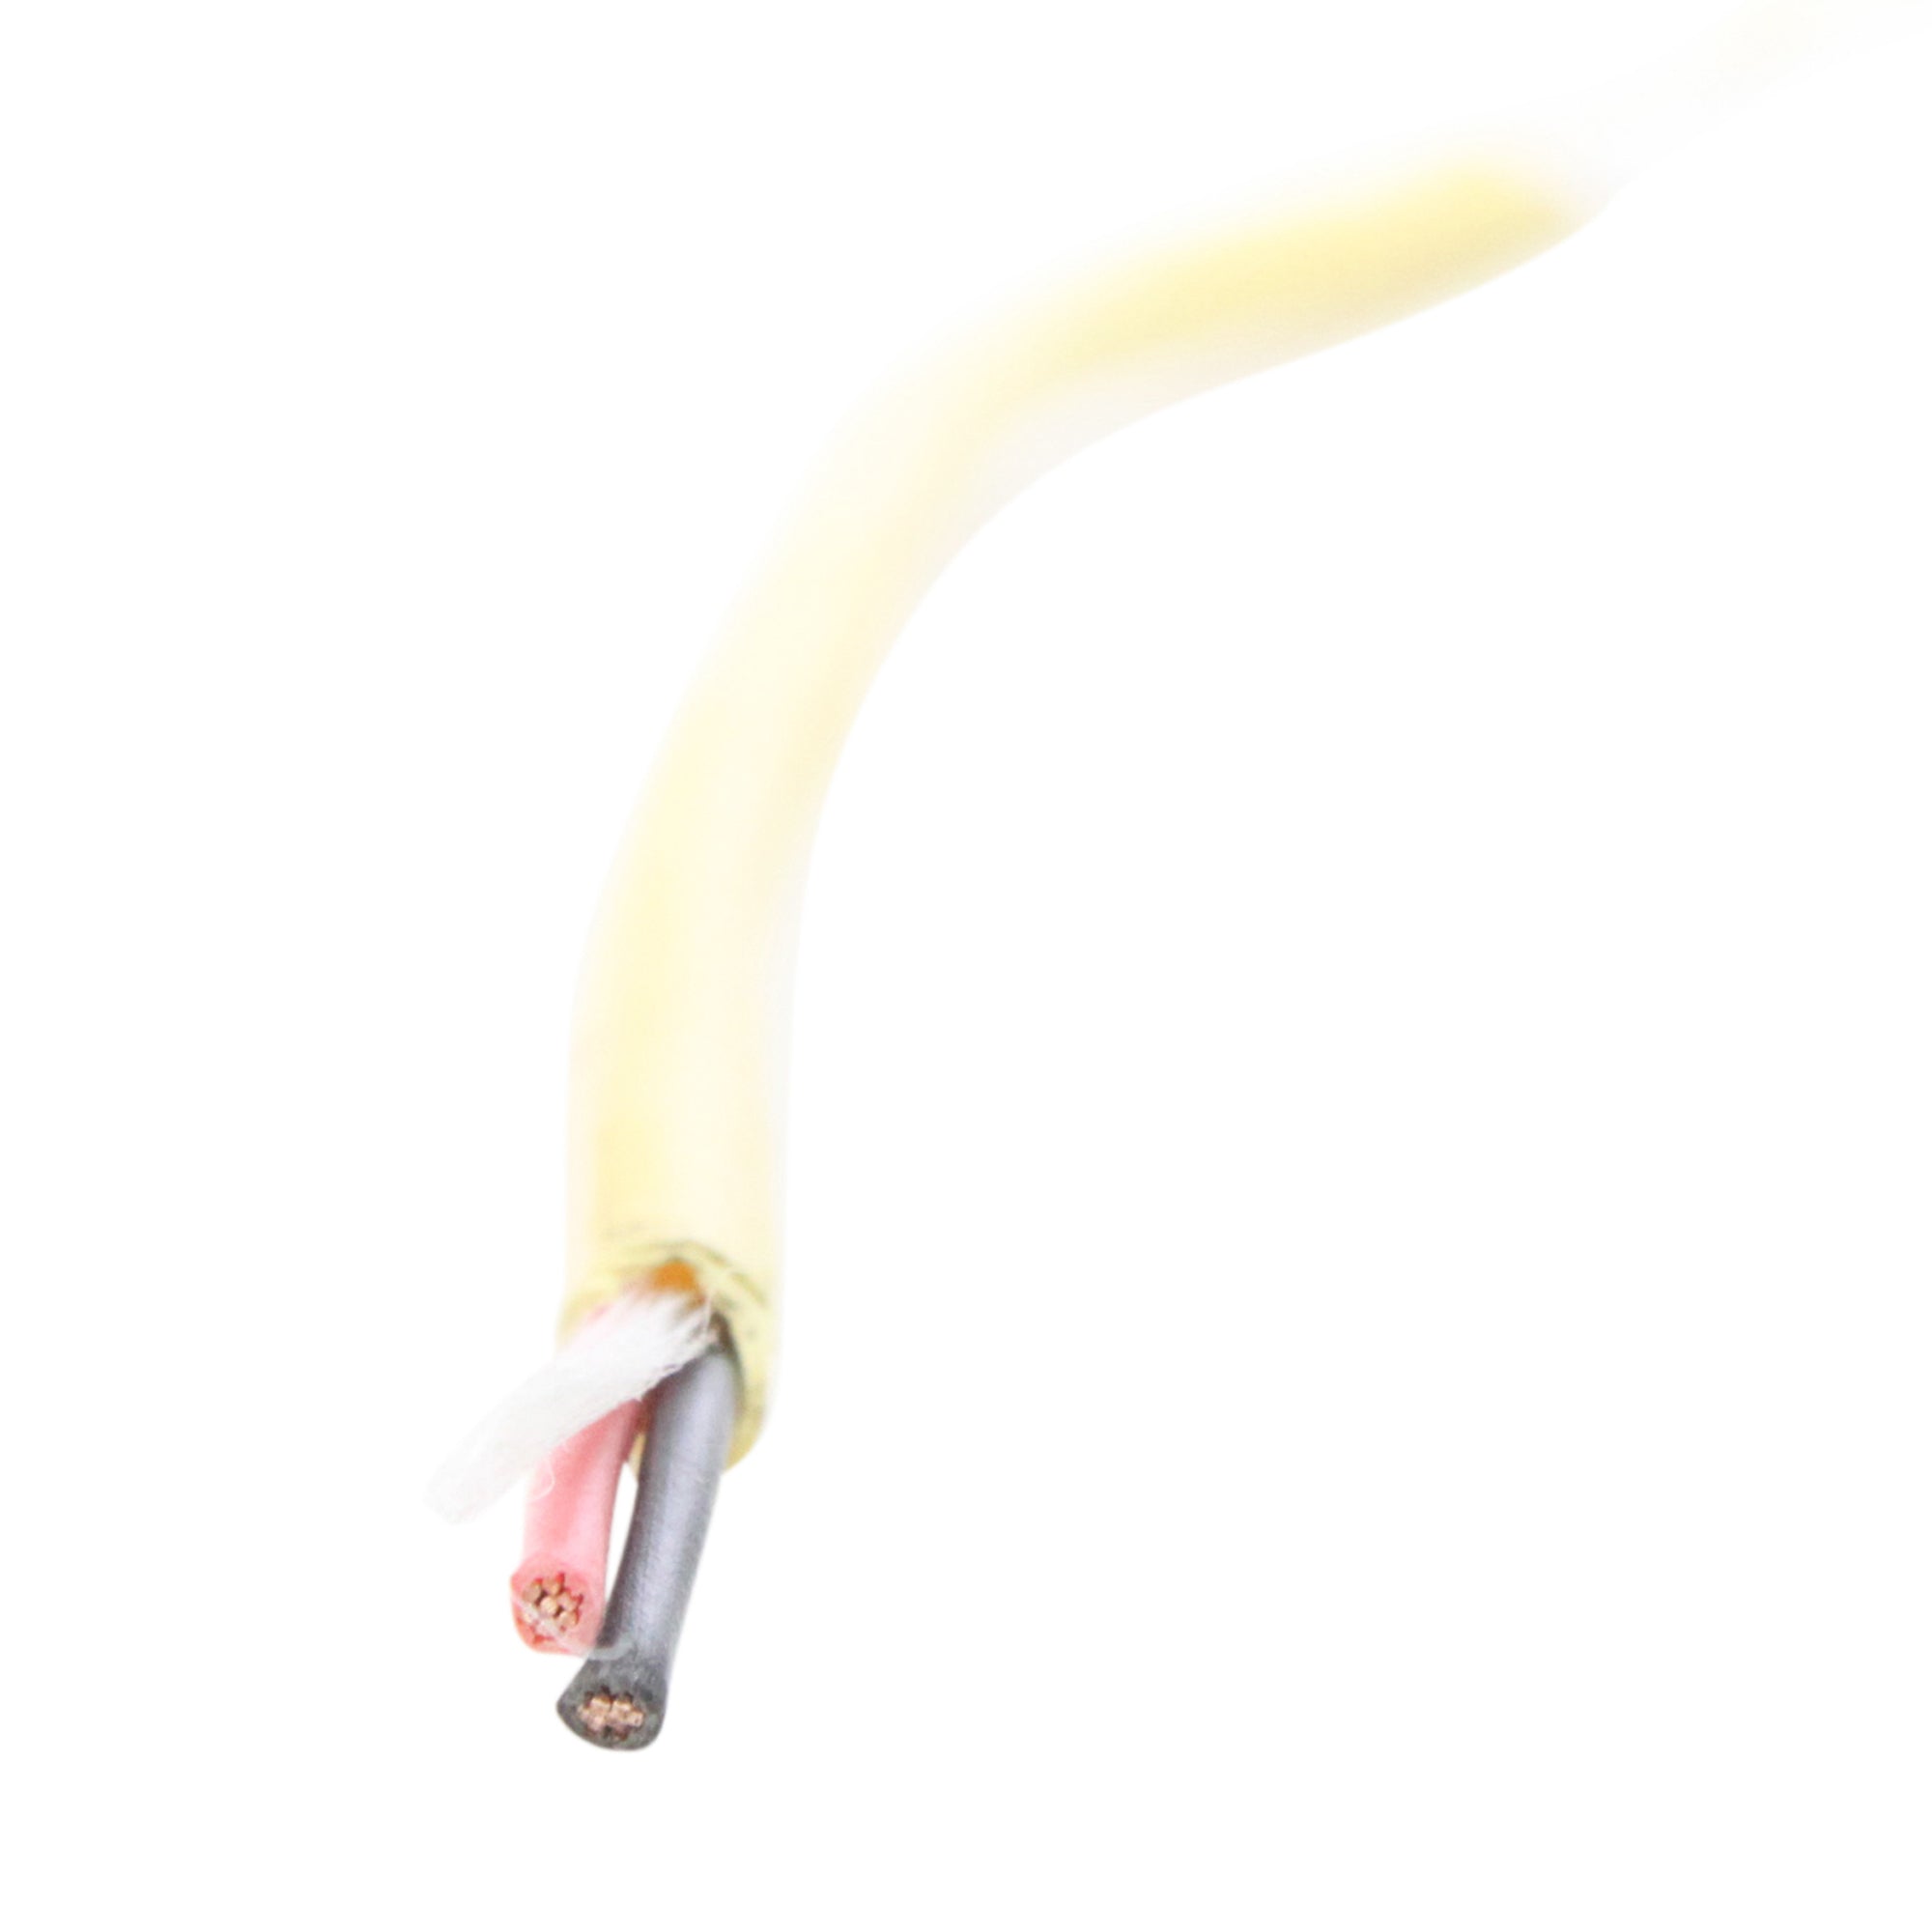 FASTER CABLE, FASTER CABLE P222C-YEL 22AWG 2C STR CONTROL CABLE, PLENUM, YELLOW, 1000-FEET